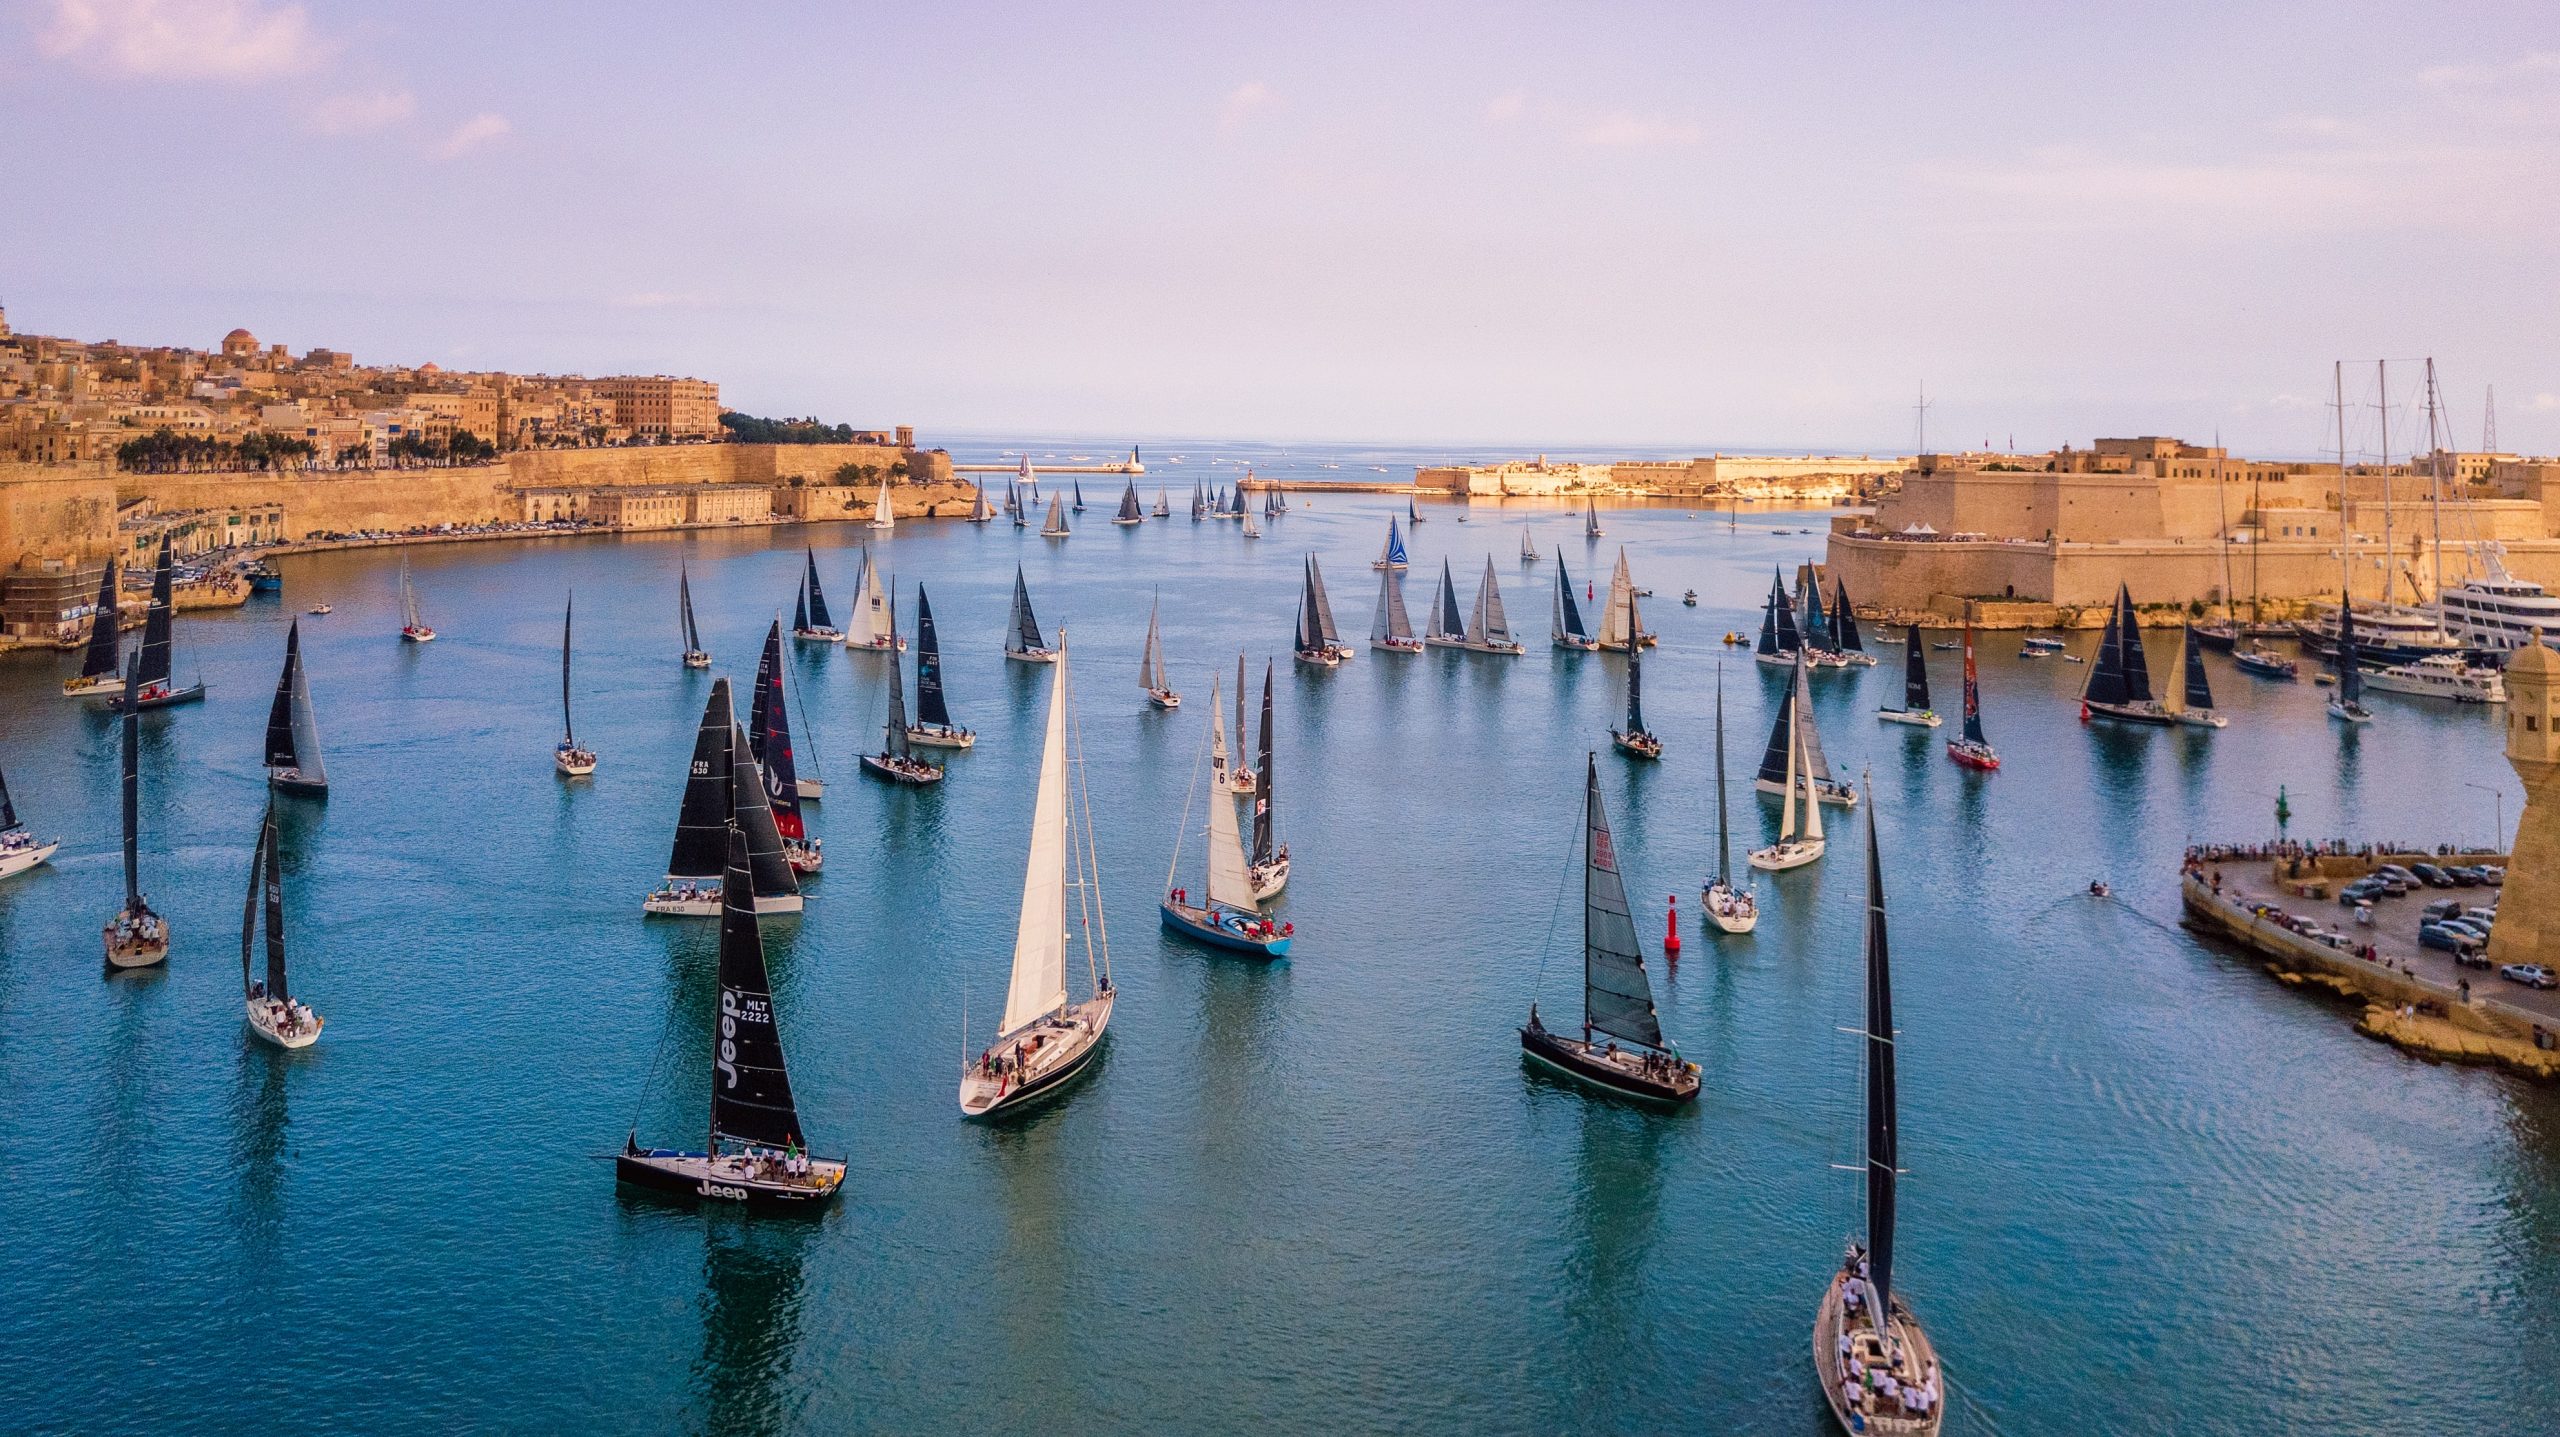 Transport Malta publishes new Small Commercial Yacht Code